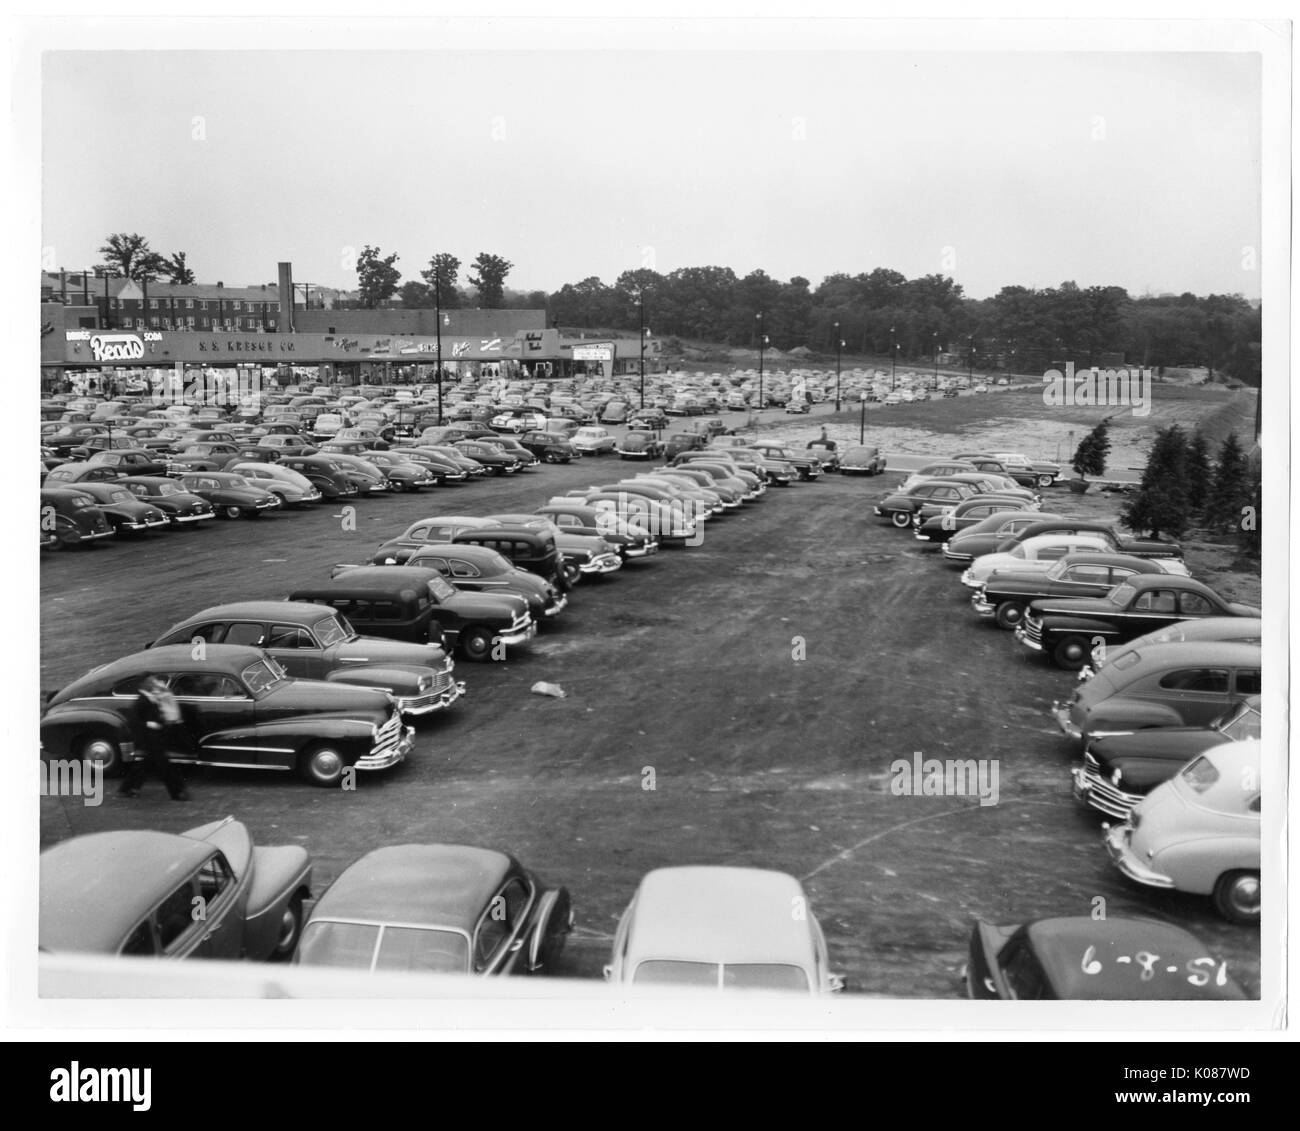 View of a packed parking lot that is under construction, in the background is part of the Northwood Shopping Center and behind the center are row homes to the left and trees to the right, one person is walking towards their car in the foreground, Baltimore, Maryland, 1951. Stock Photo